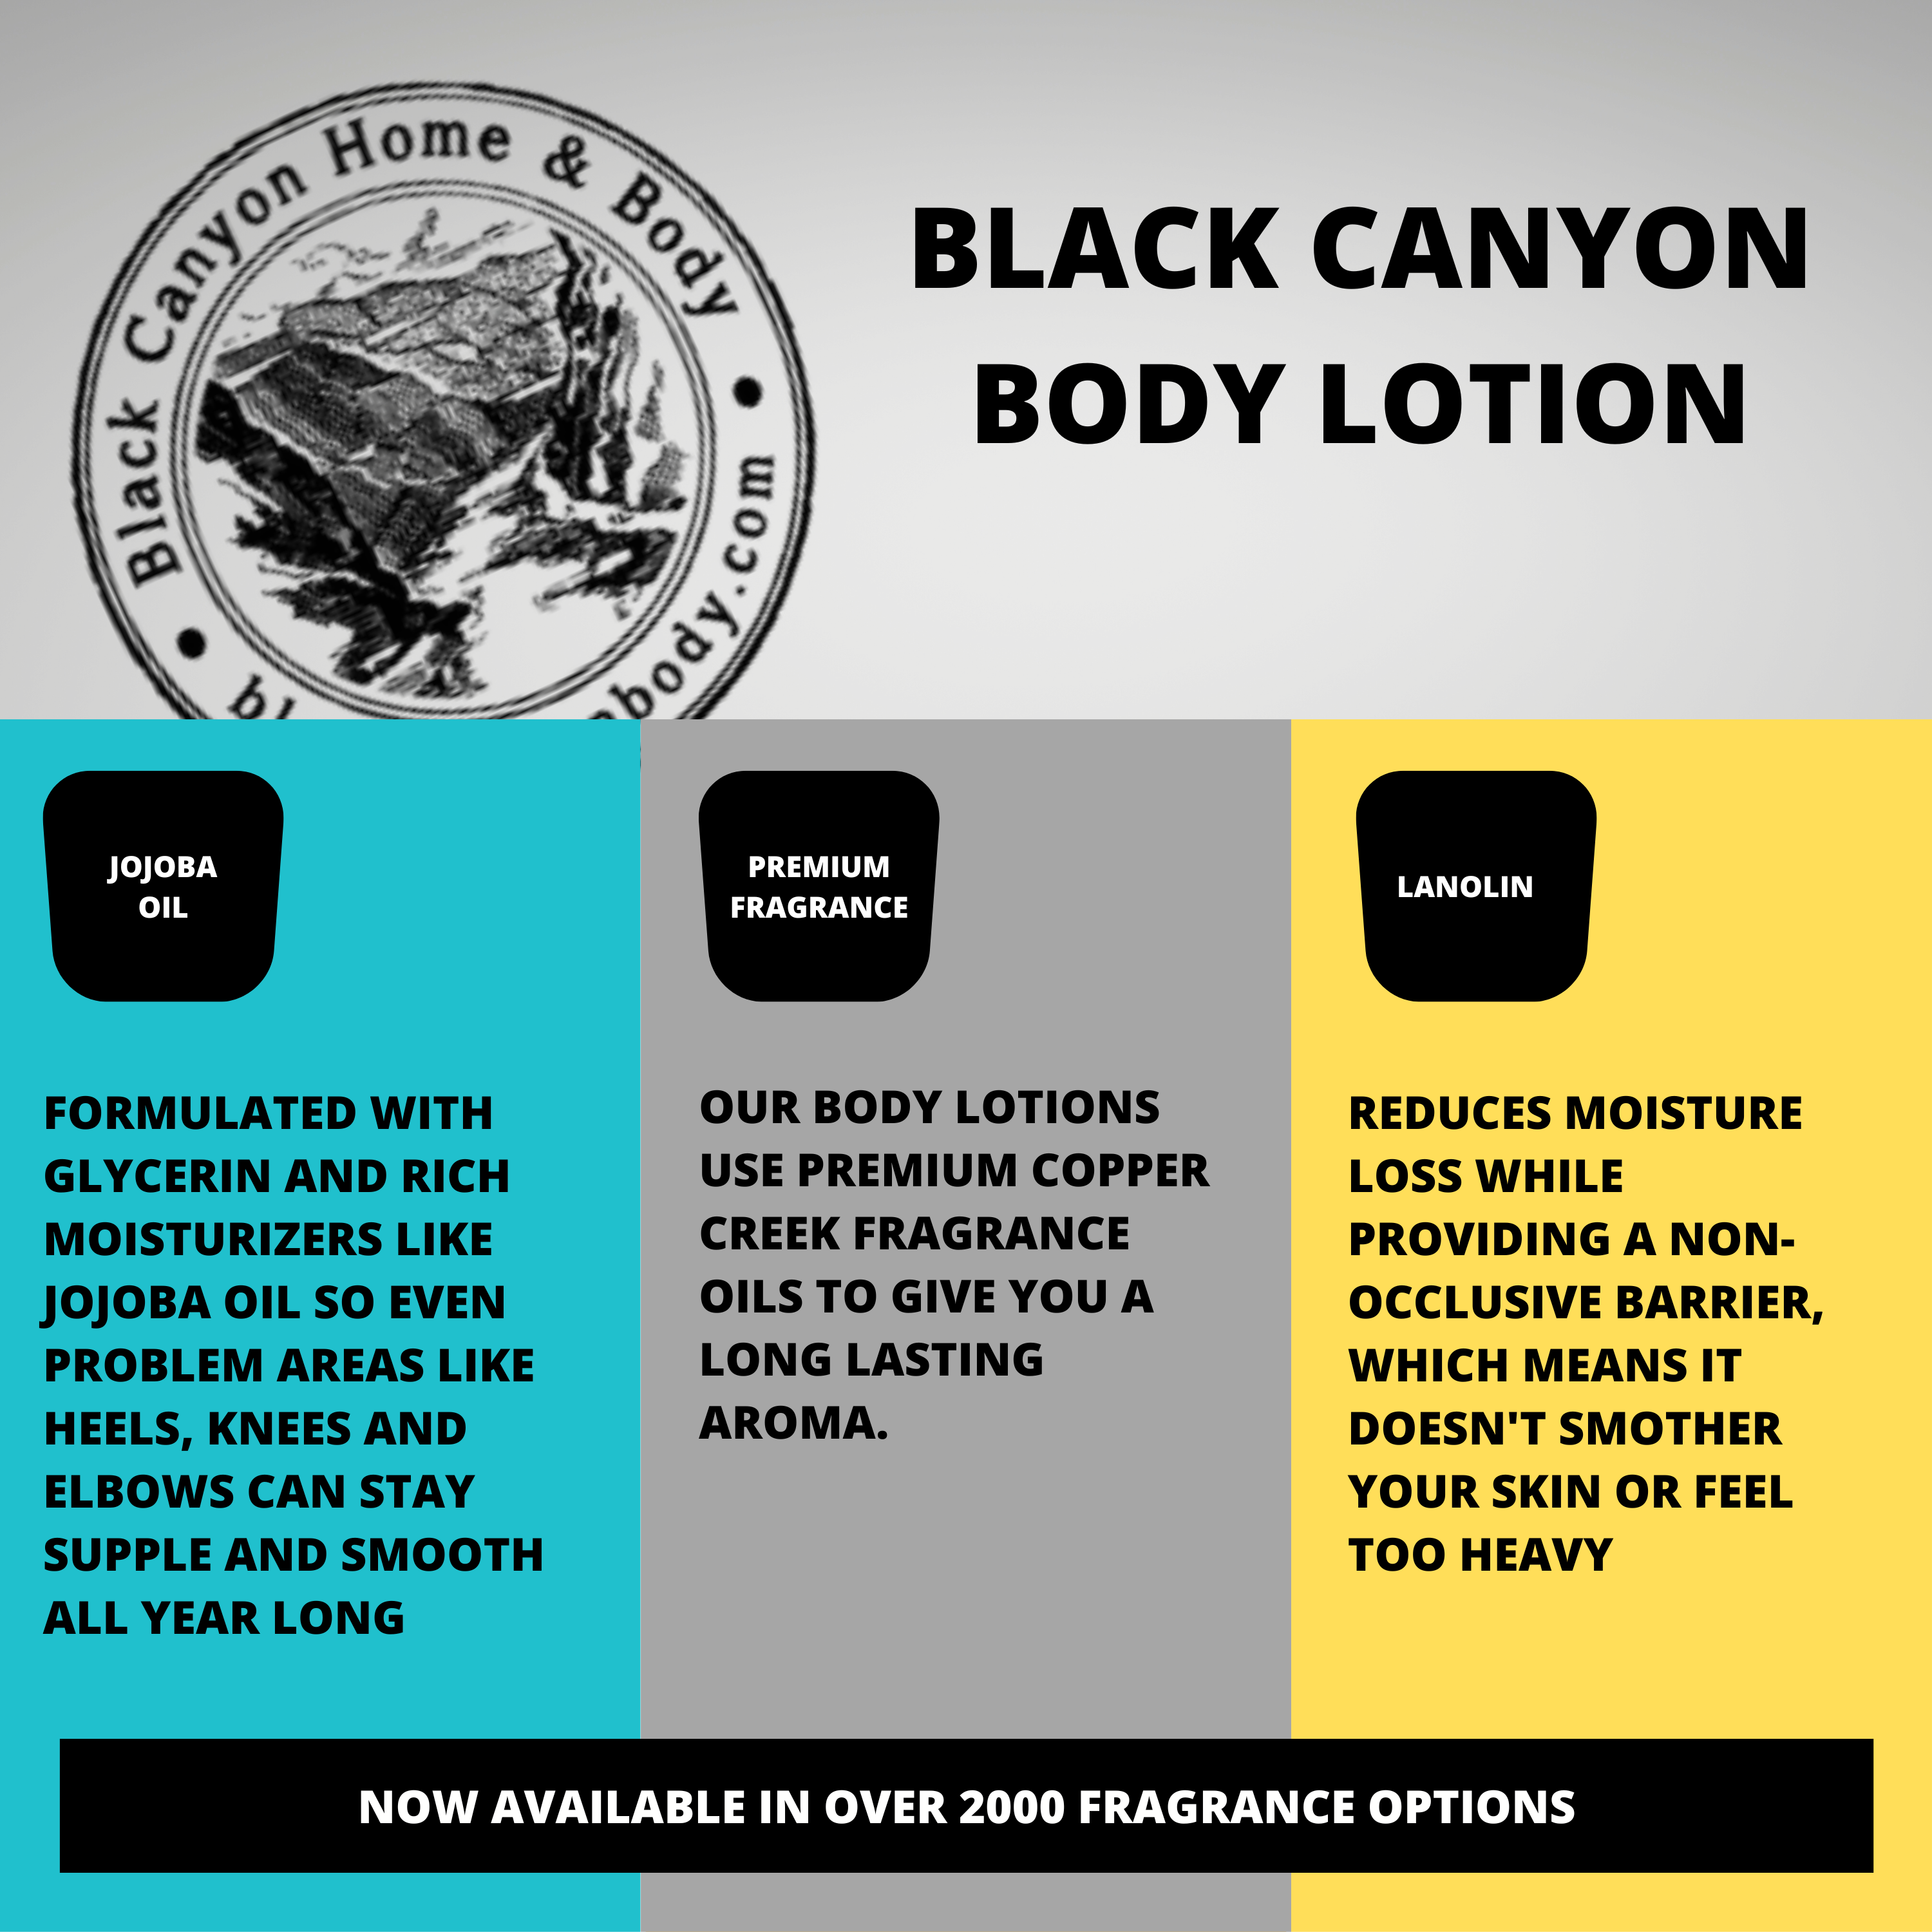 Black Canyon Autumn Spiced Fir Scented Luxury Body Lotion with Lanolin and Jojoba Oil